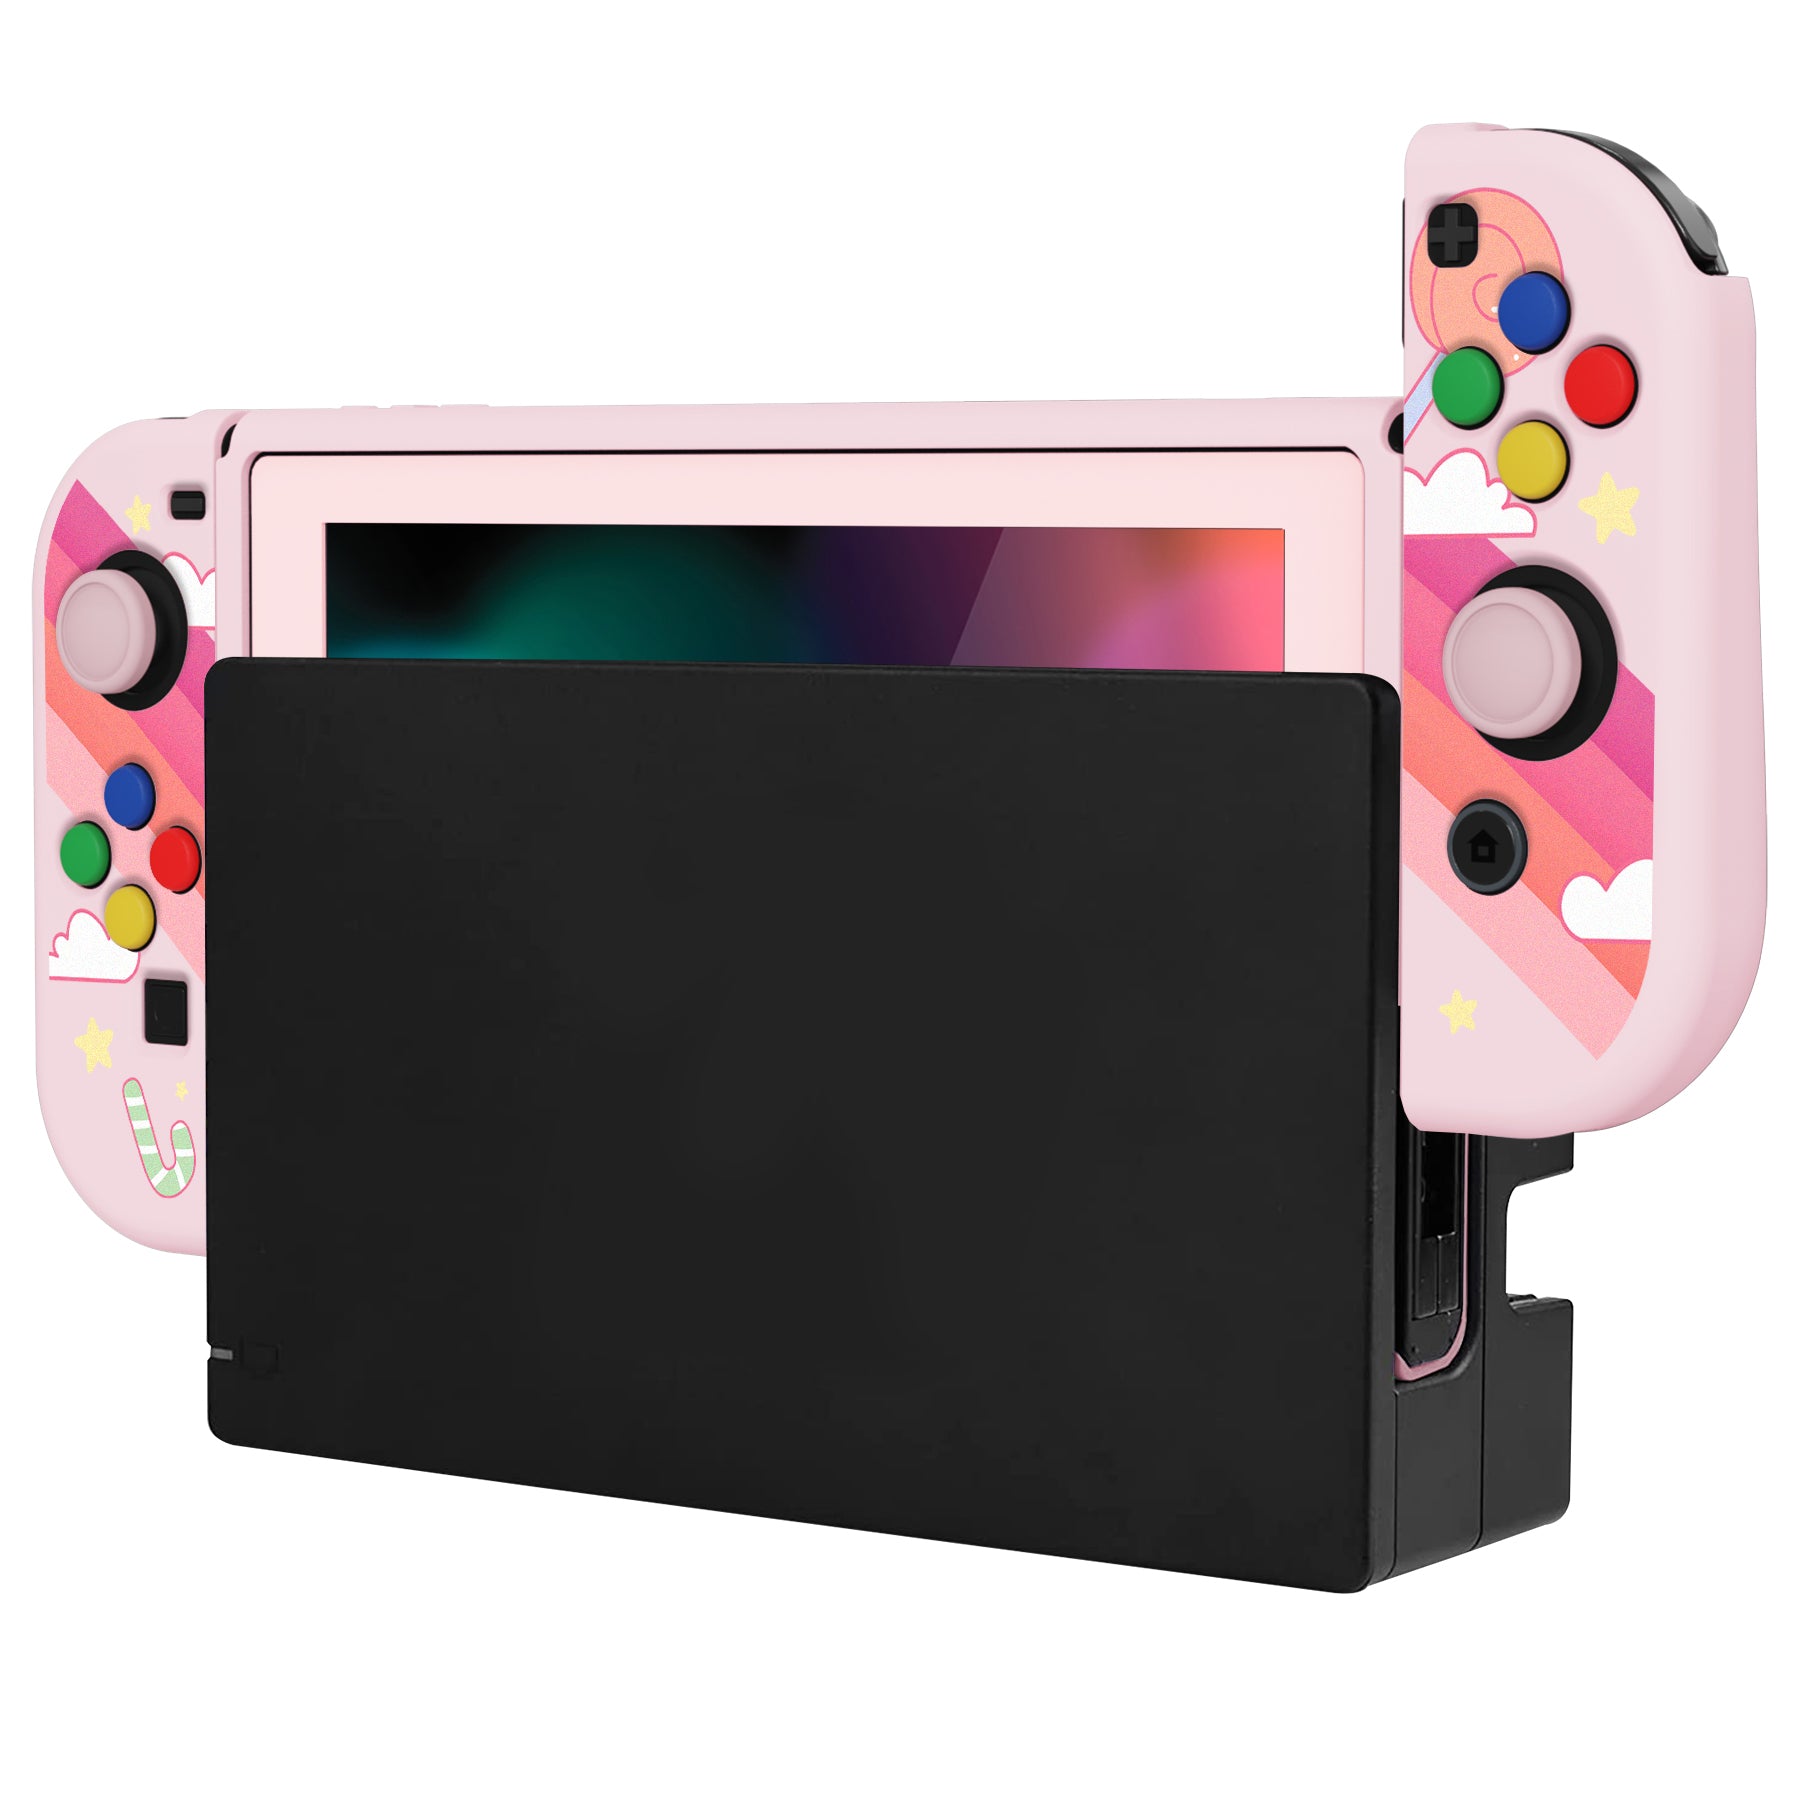 PlayVital ZealProtect Soft Protective Case for Nintendo Switch, Flexible Cover for Switch with Tempered Glass Screen Protector & Thumb Grips & ABXY Direction Button Caps - Candy Rainbow Unicorn - RNSYV6007 playvital